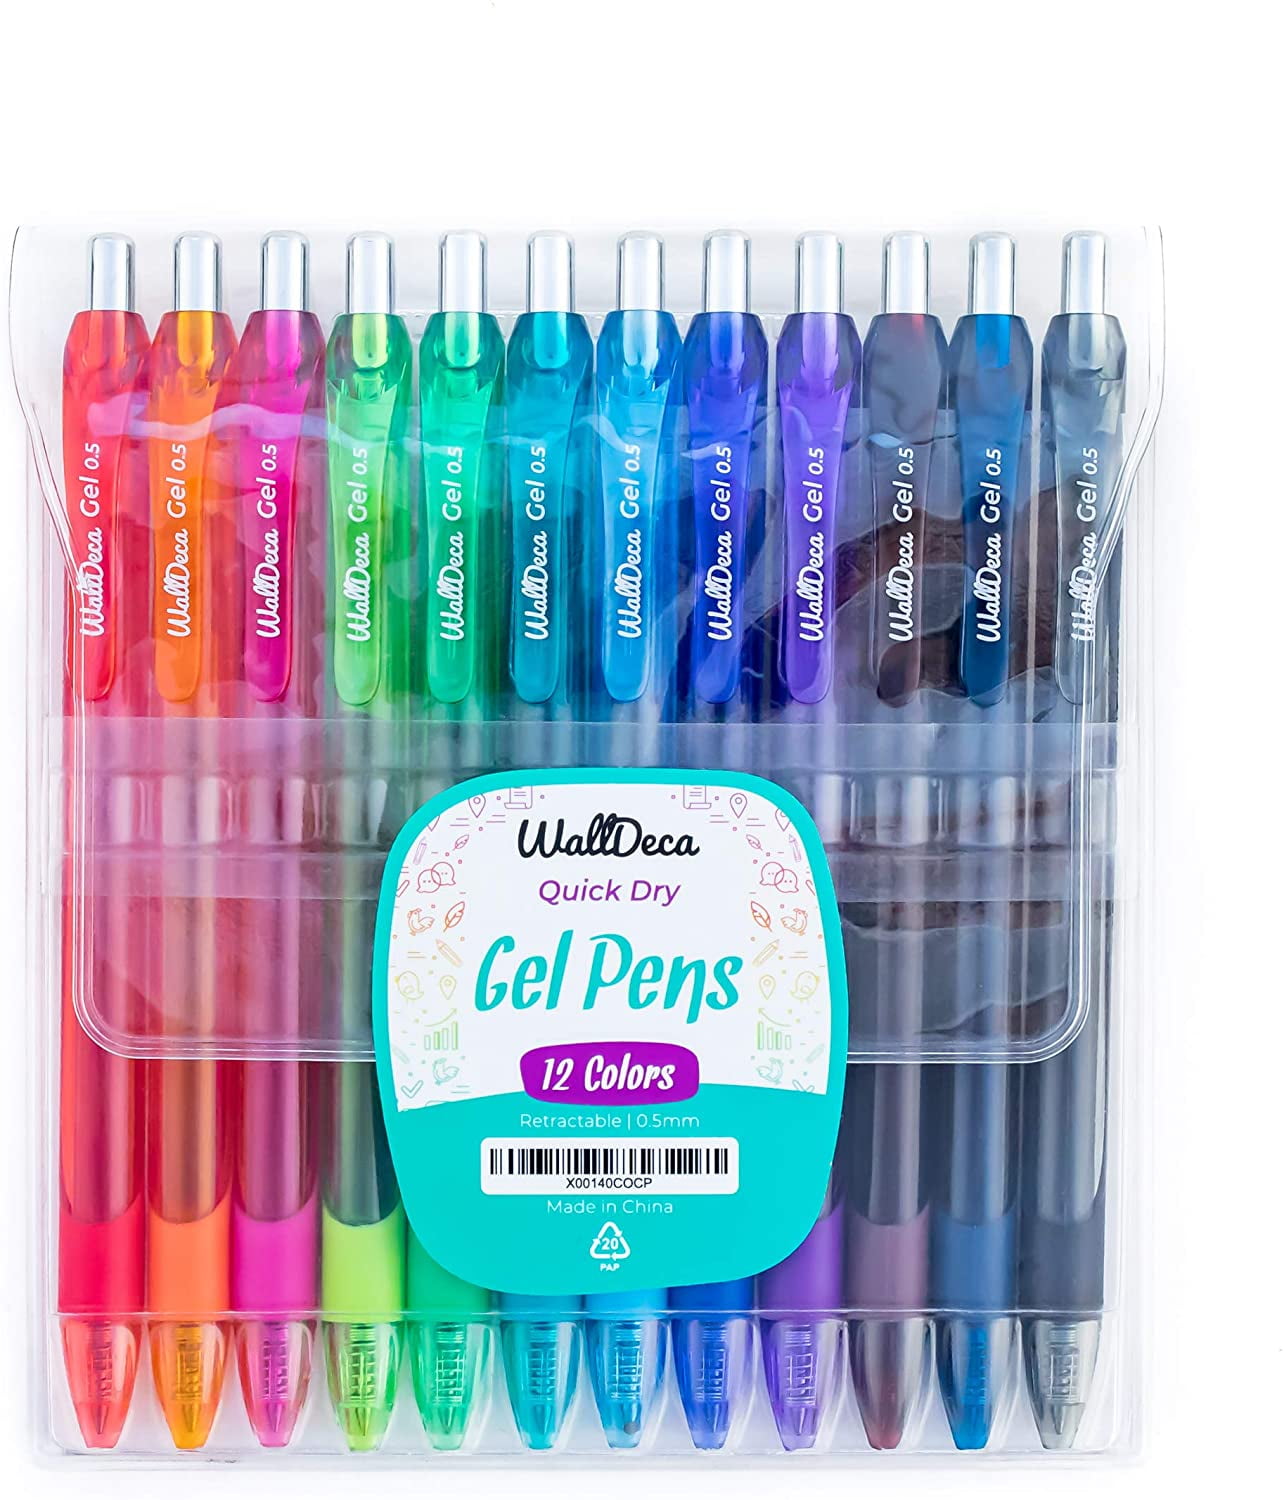 WallDeca Felt Tip Pens, Made for Everyday Writing, Journals, Notes and  Doodling (12-Pack)